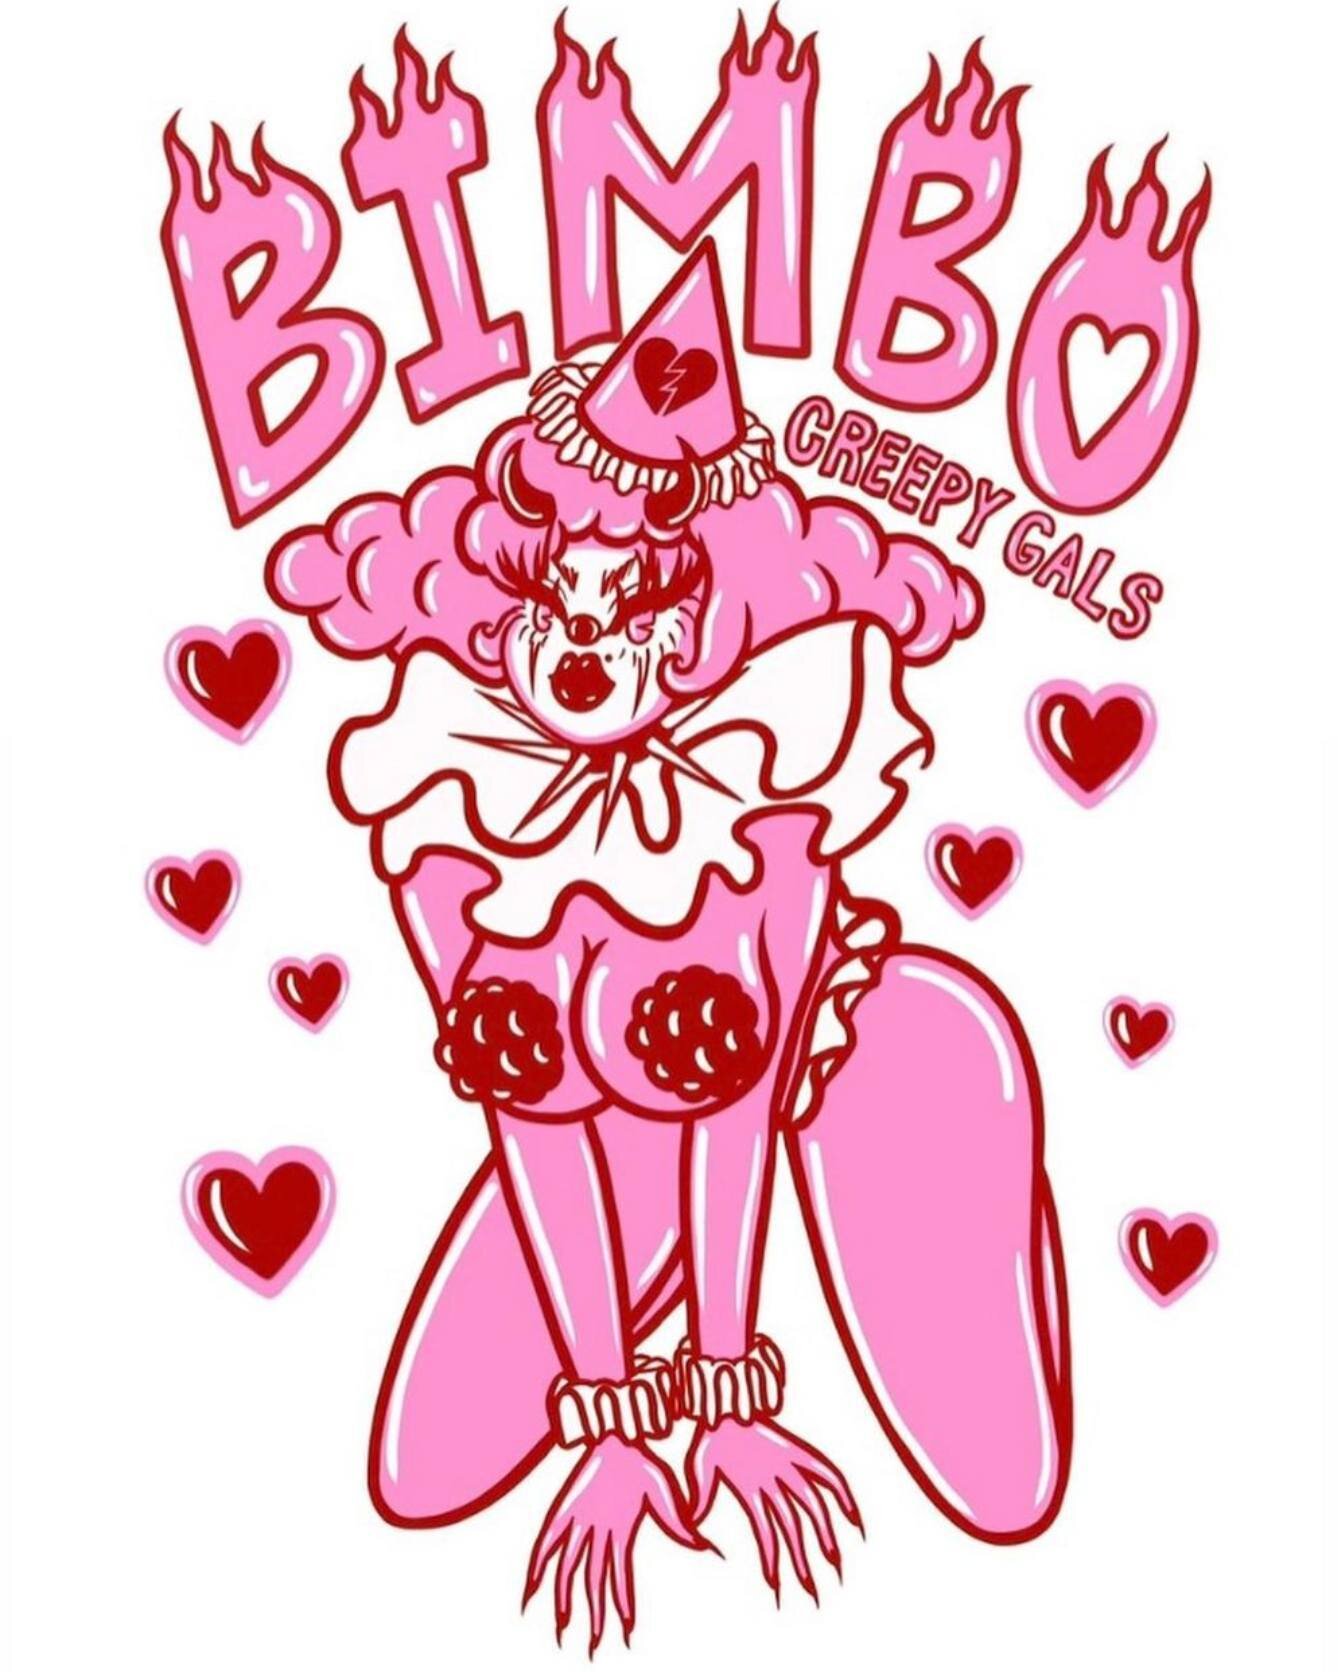 What better way for us to say Happy Valentines day then to post a sexy, sl*tty, bimbo love clown by @creepy.gal⁠
.⁠
💚 💖 💚⁠
.⁠
.⁠
.⁠
#valentinesday #clownlove #bimbo #babesofvalhalla #babesofvalhallapodcast  #spacebabes #alien #sexwork #stripperart